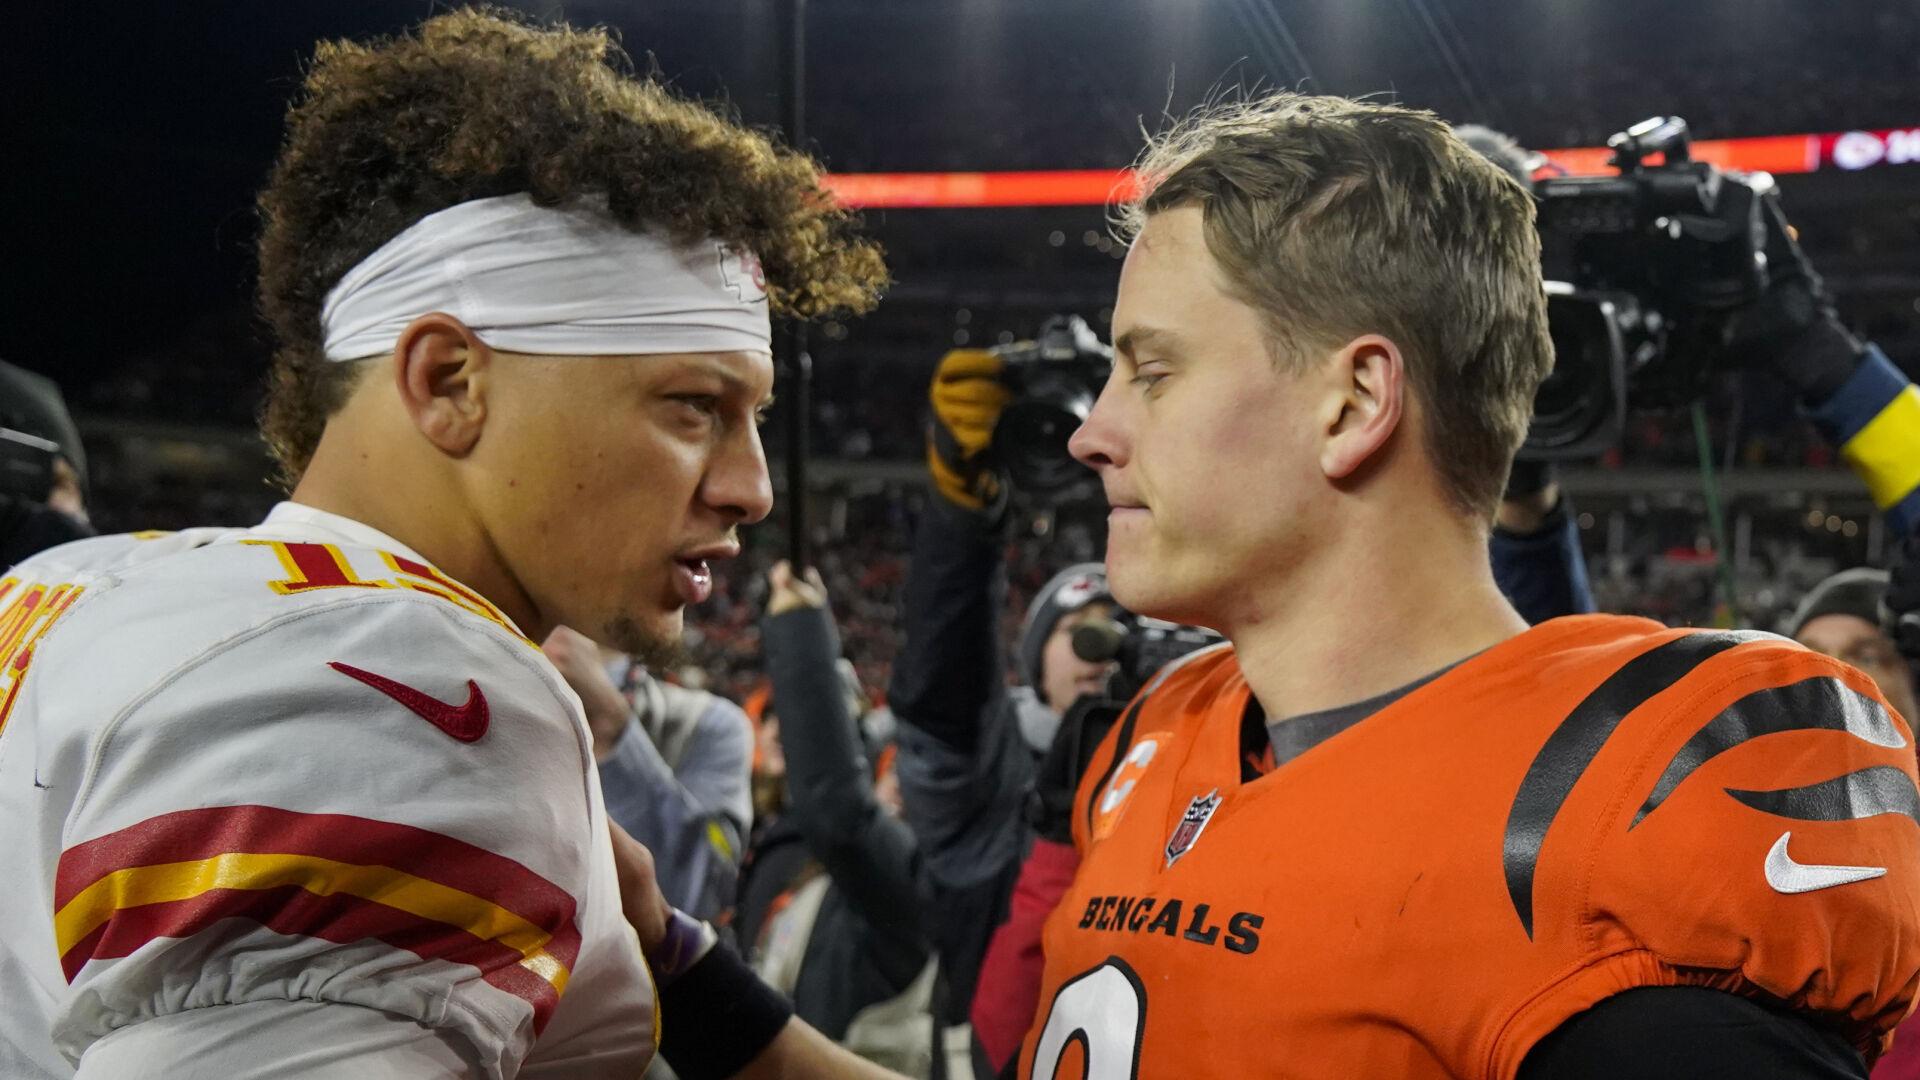 Bengals vs Chiefs Odds, Spread: Cincinnati Now Favored in AFC Championship  Game